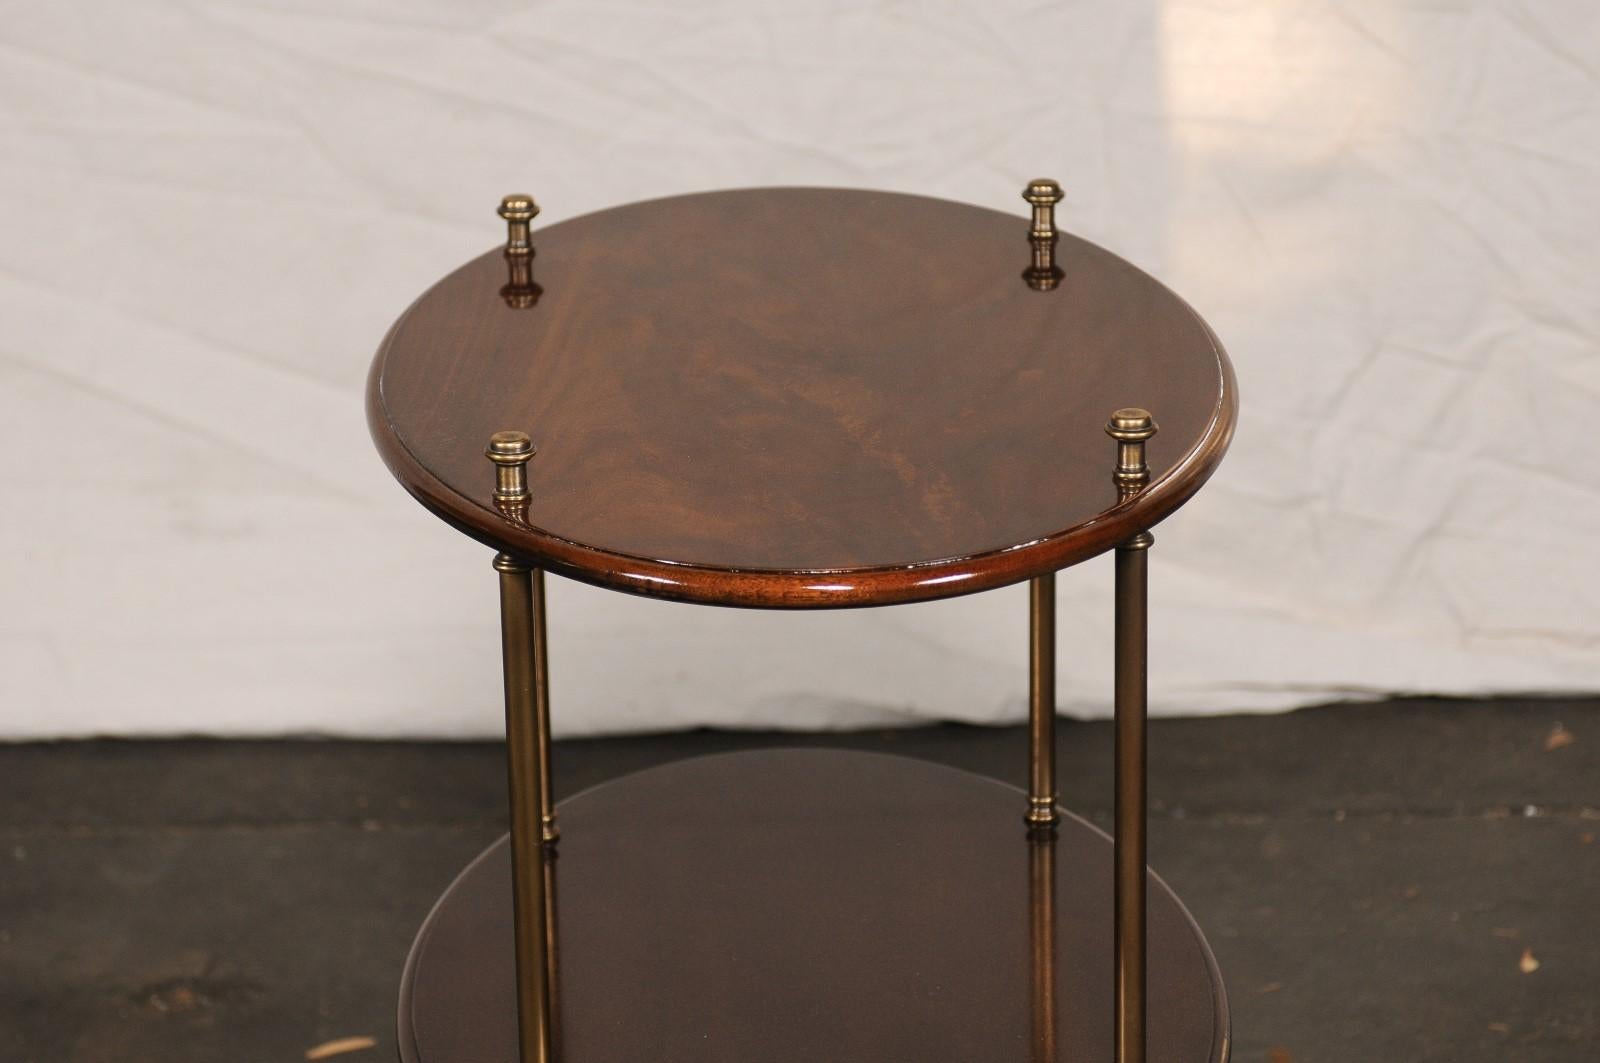 19th-20th Century English Mahogany & Brass Three-Tier Oval Étagère In Good Condition For Sale In Atlanta, GA